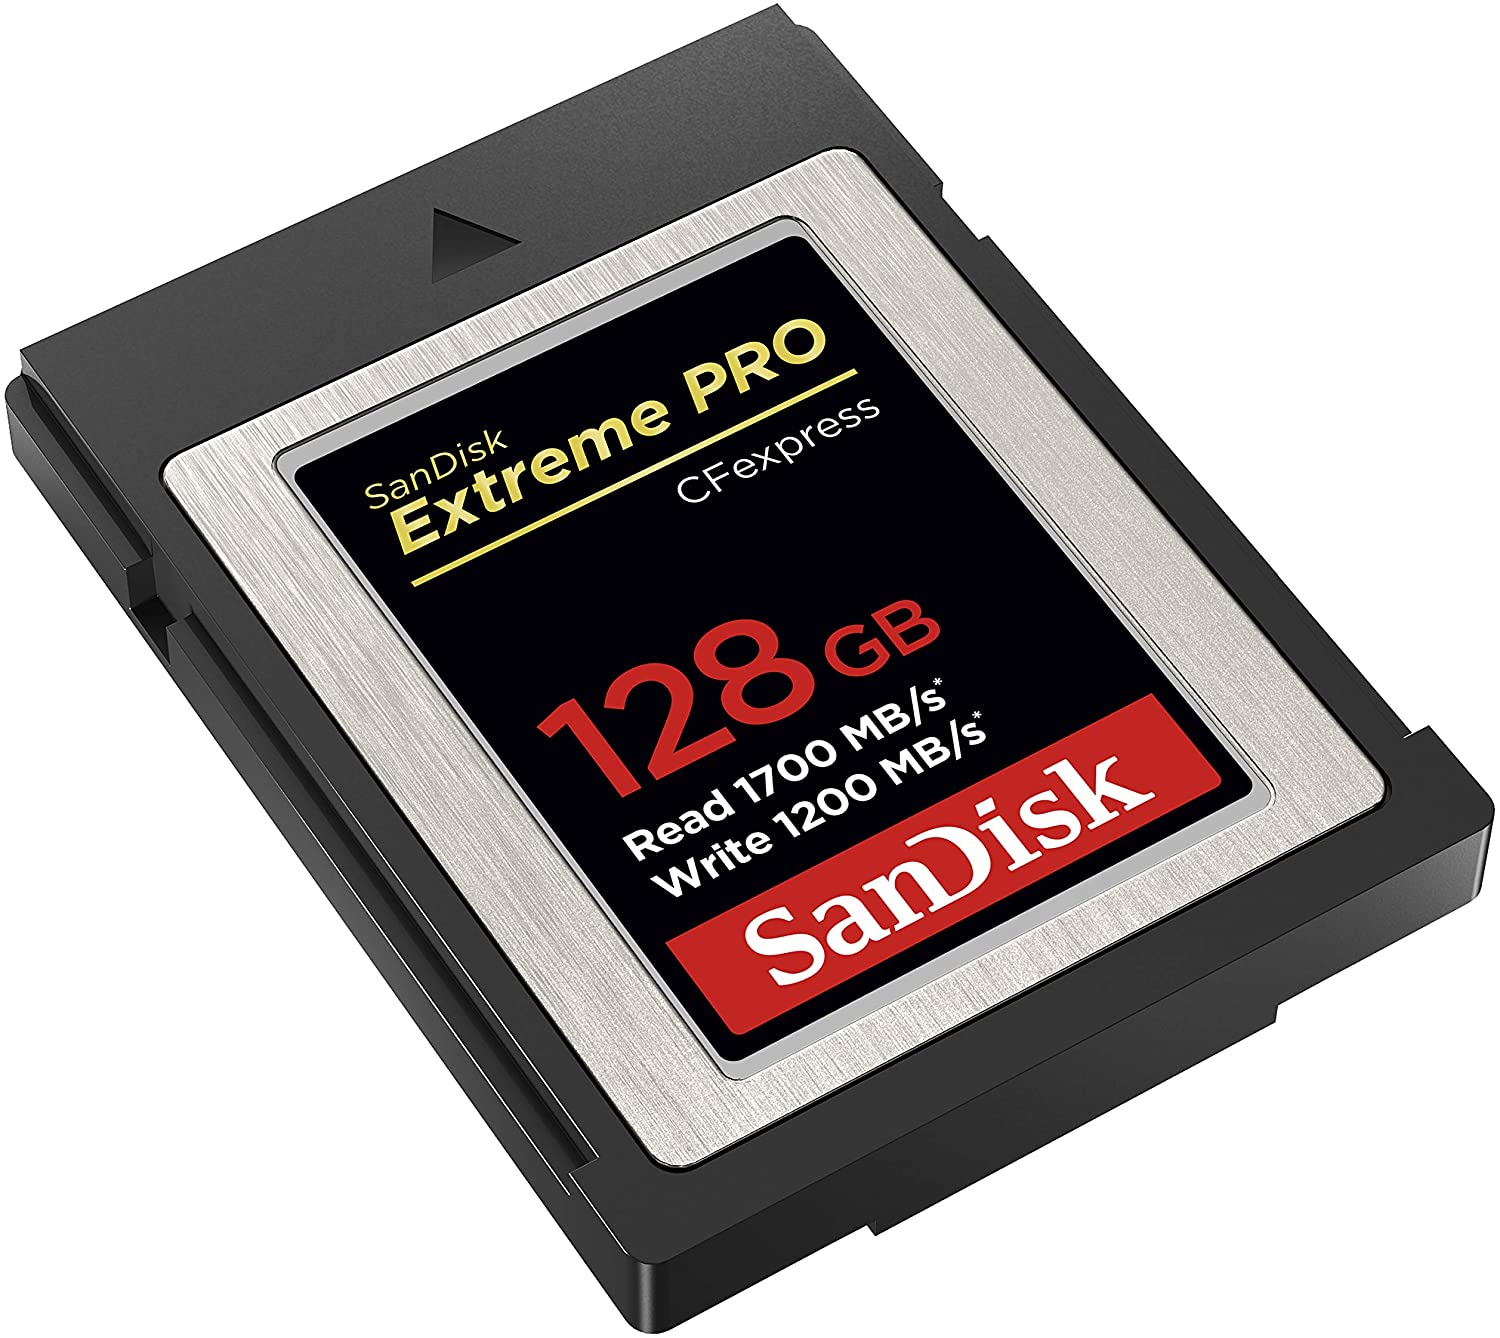 Compact Flash Memory Cards: SanDisk Extreme Pro CFast 2.0: 512GB $359.99 or 256GB $189.99 or 128GB SanDisk Extreme Pro CFExpress Type-B Memory Card $109.99 + Free Shipping via B&H